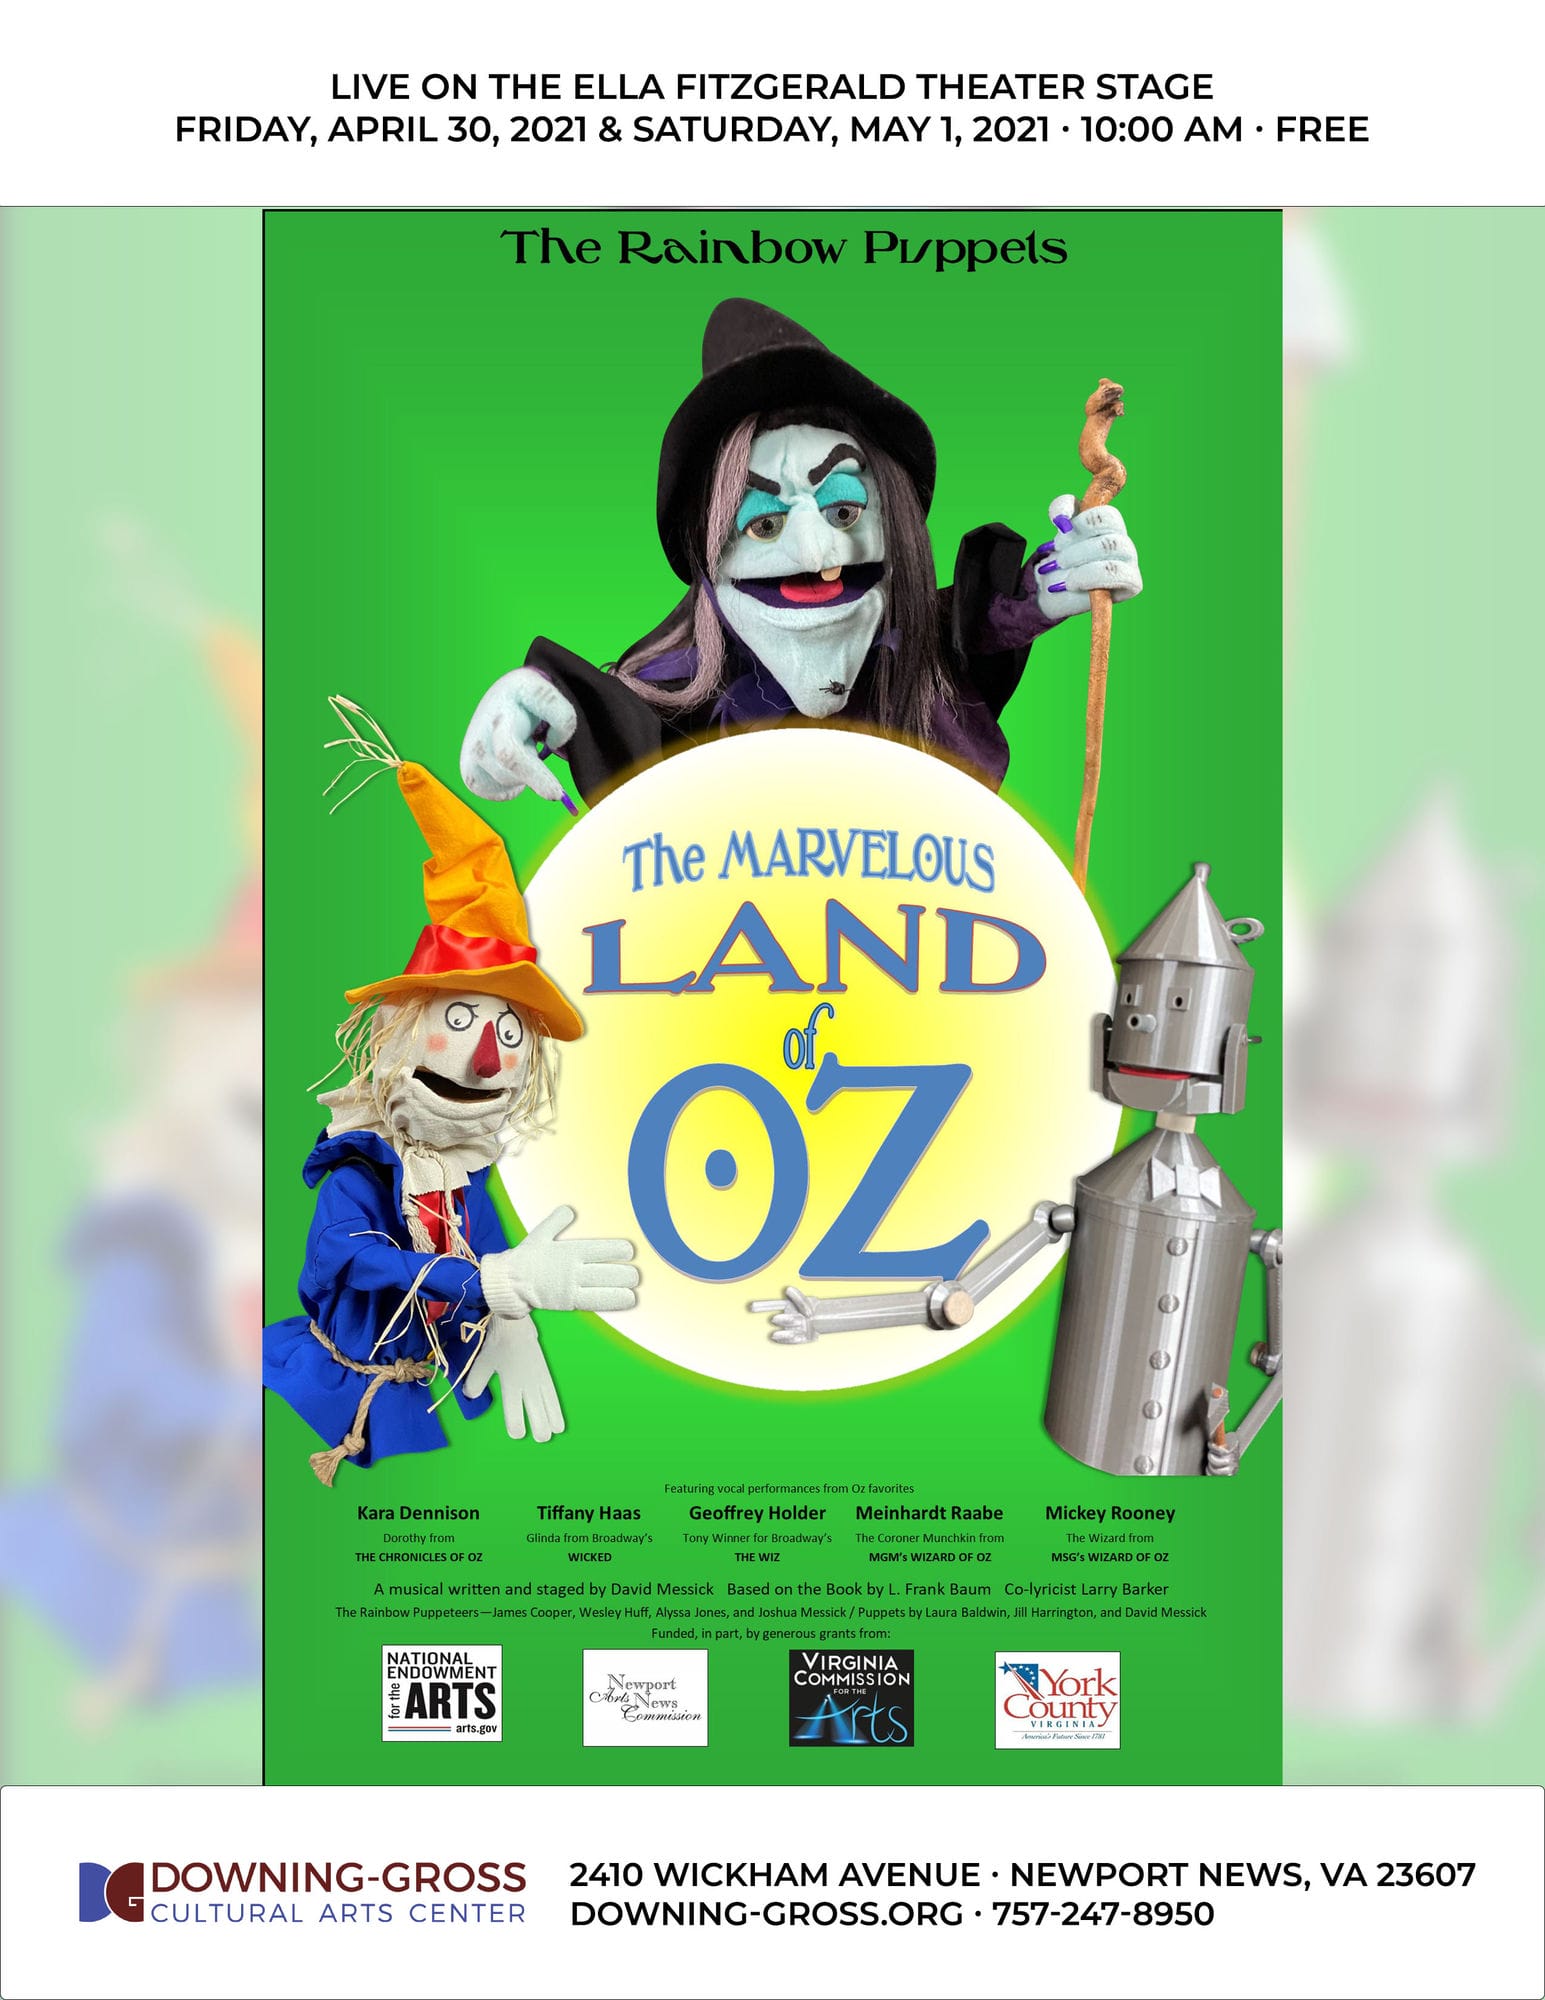 The Marvelous Land of Oz Puppet Show